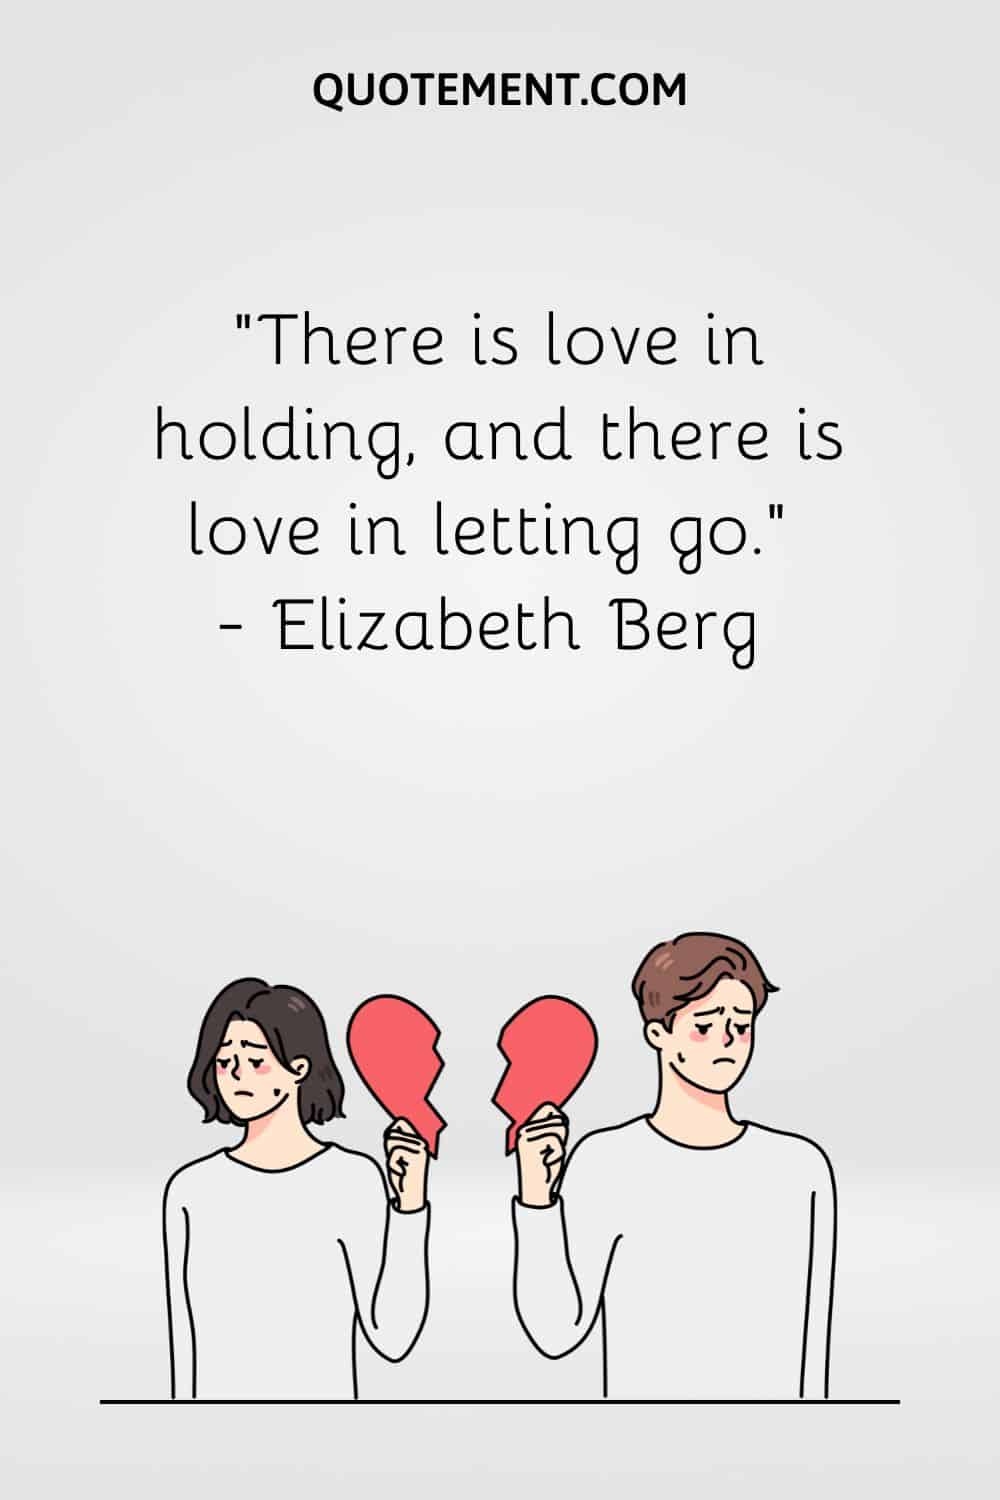 There is love in holding, and there is love in letting go